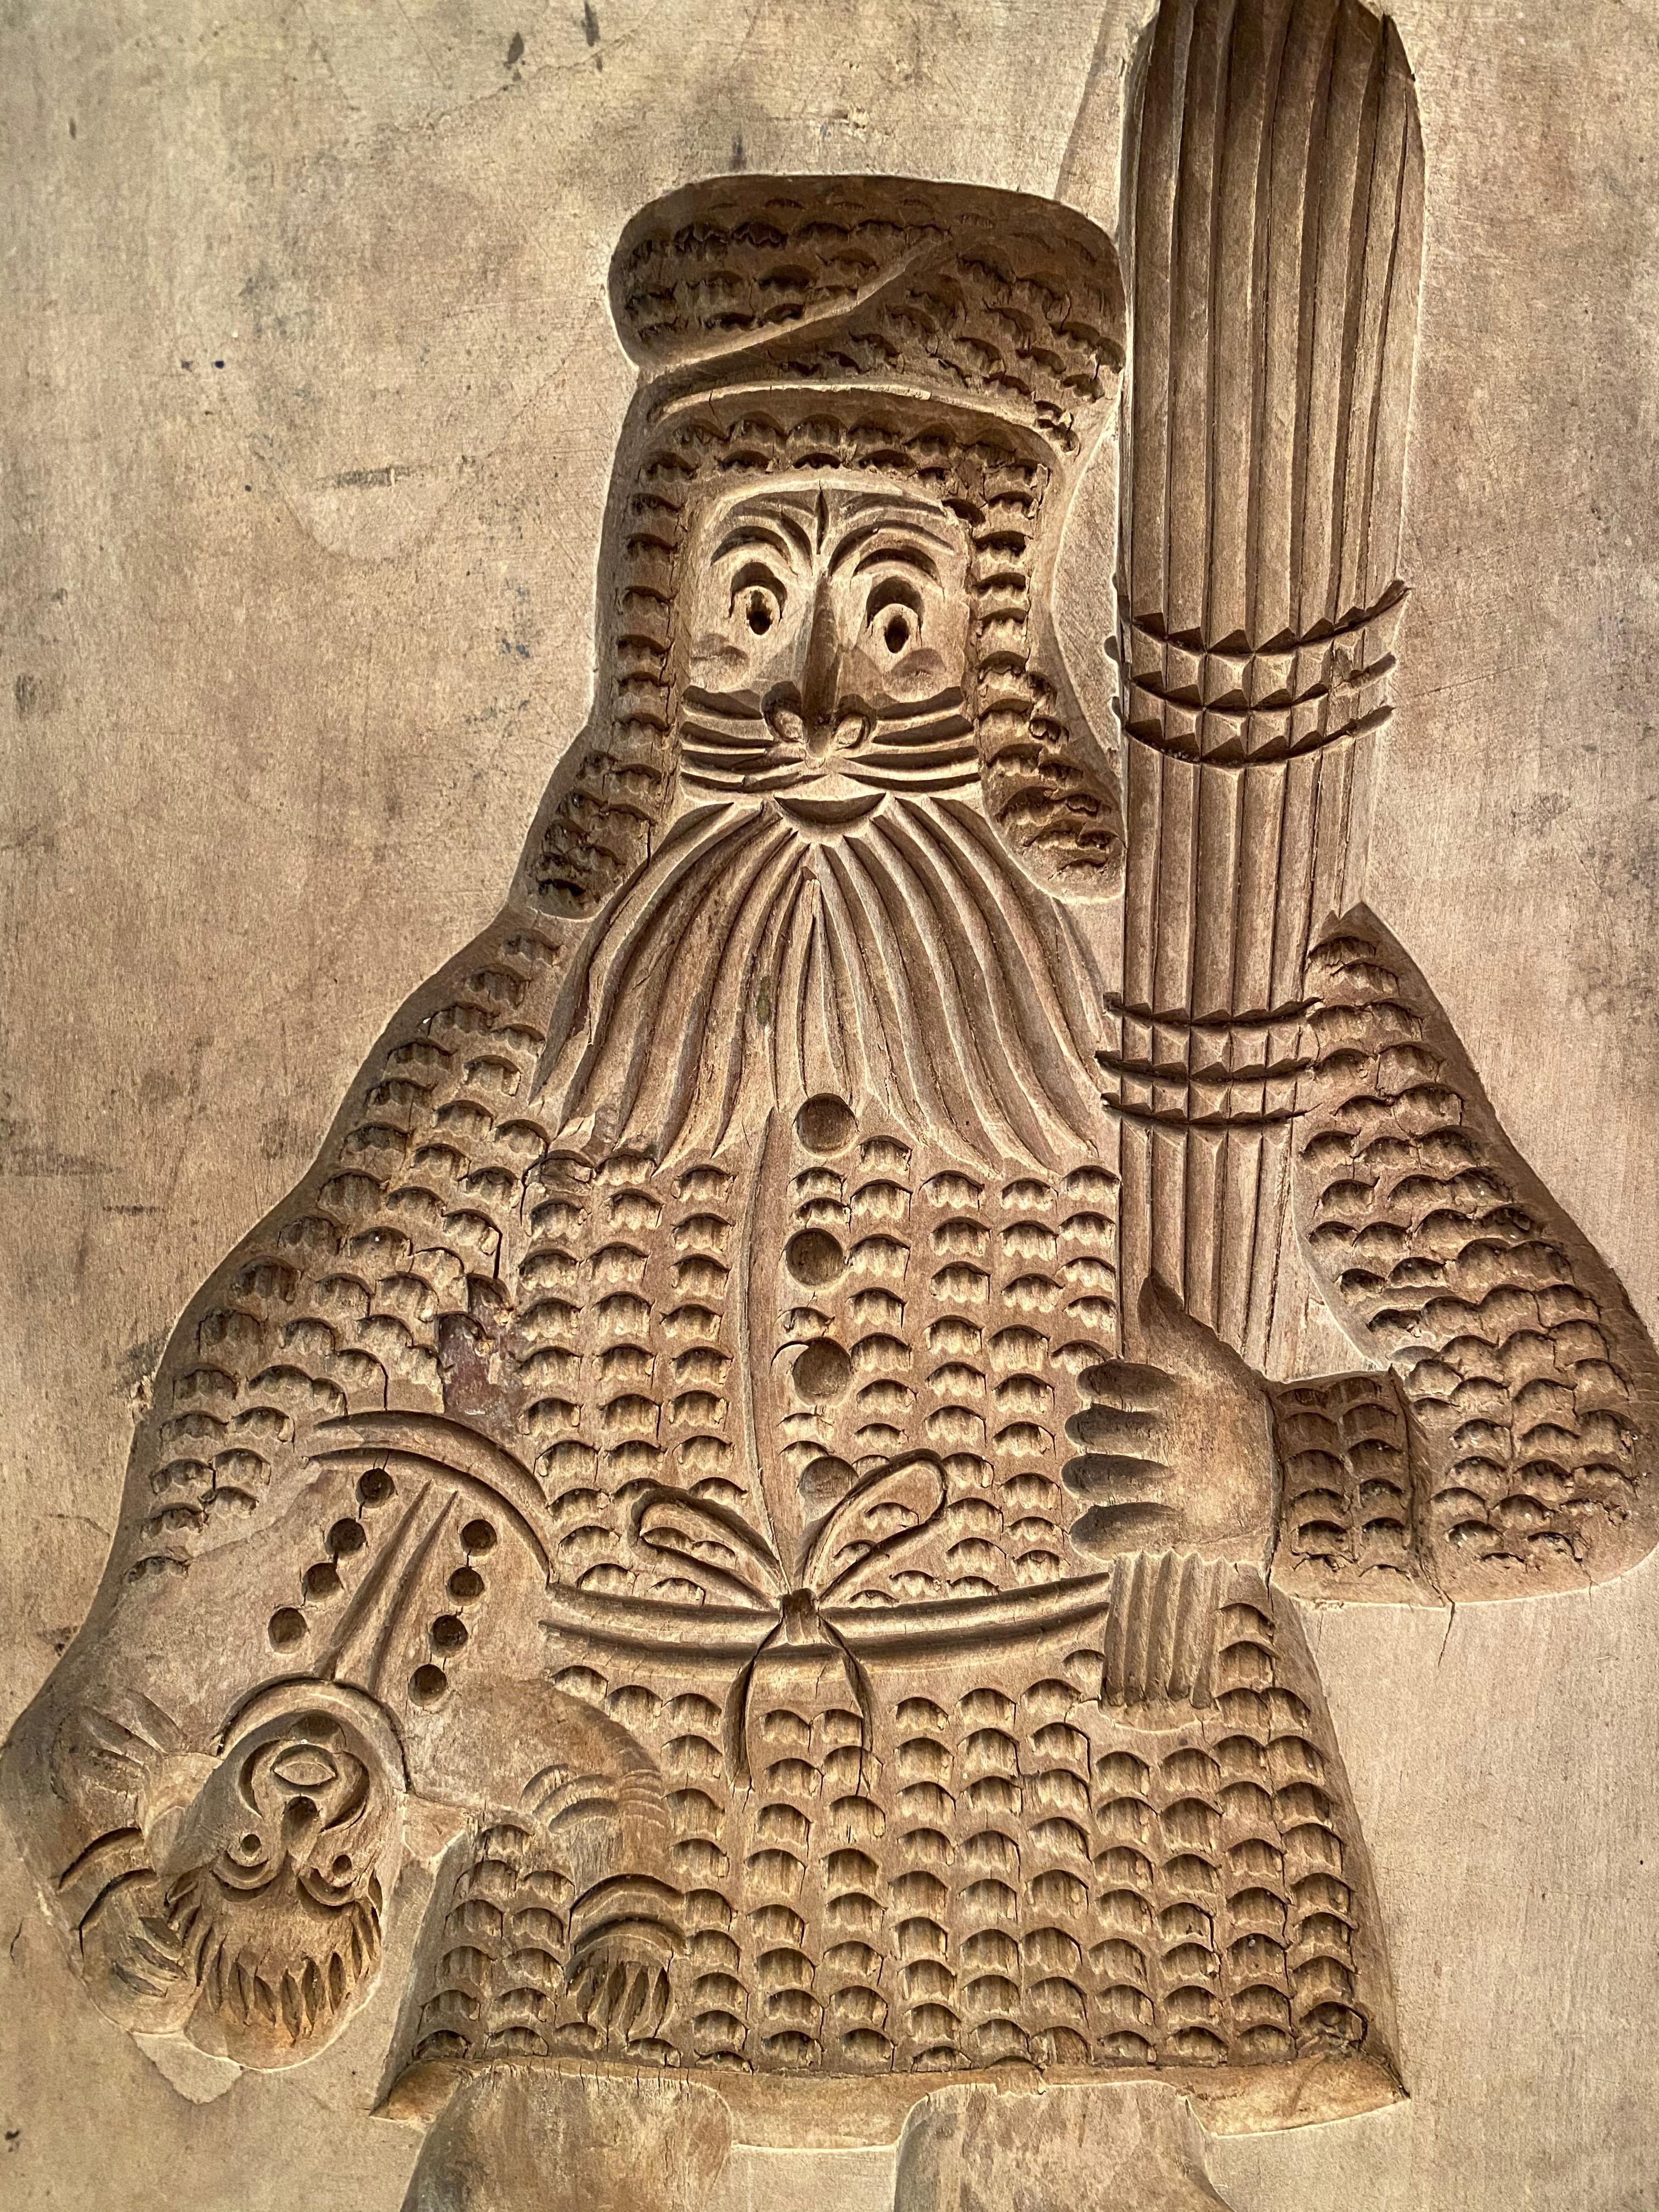 Classic 19th century wooden gingerbread cookie or speculaas springerle Mold, circa 1860-1880 (Man with a child). Made of hand carved wood. Found at an estate sale in Vienna, Austria.